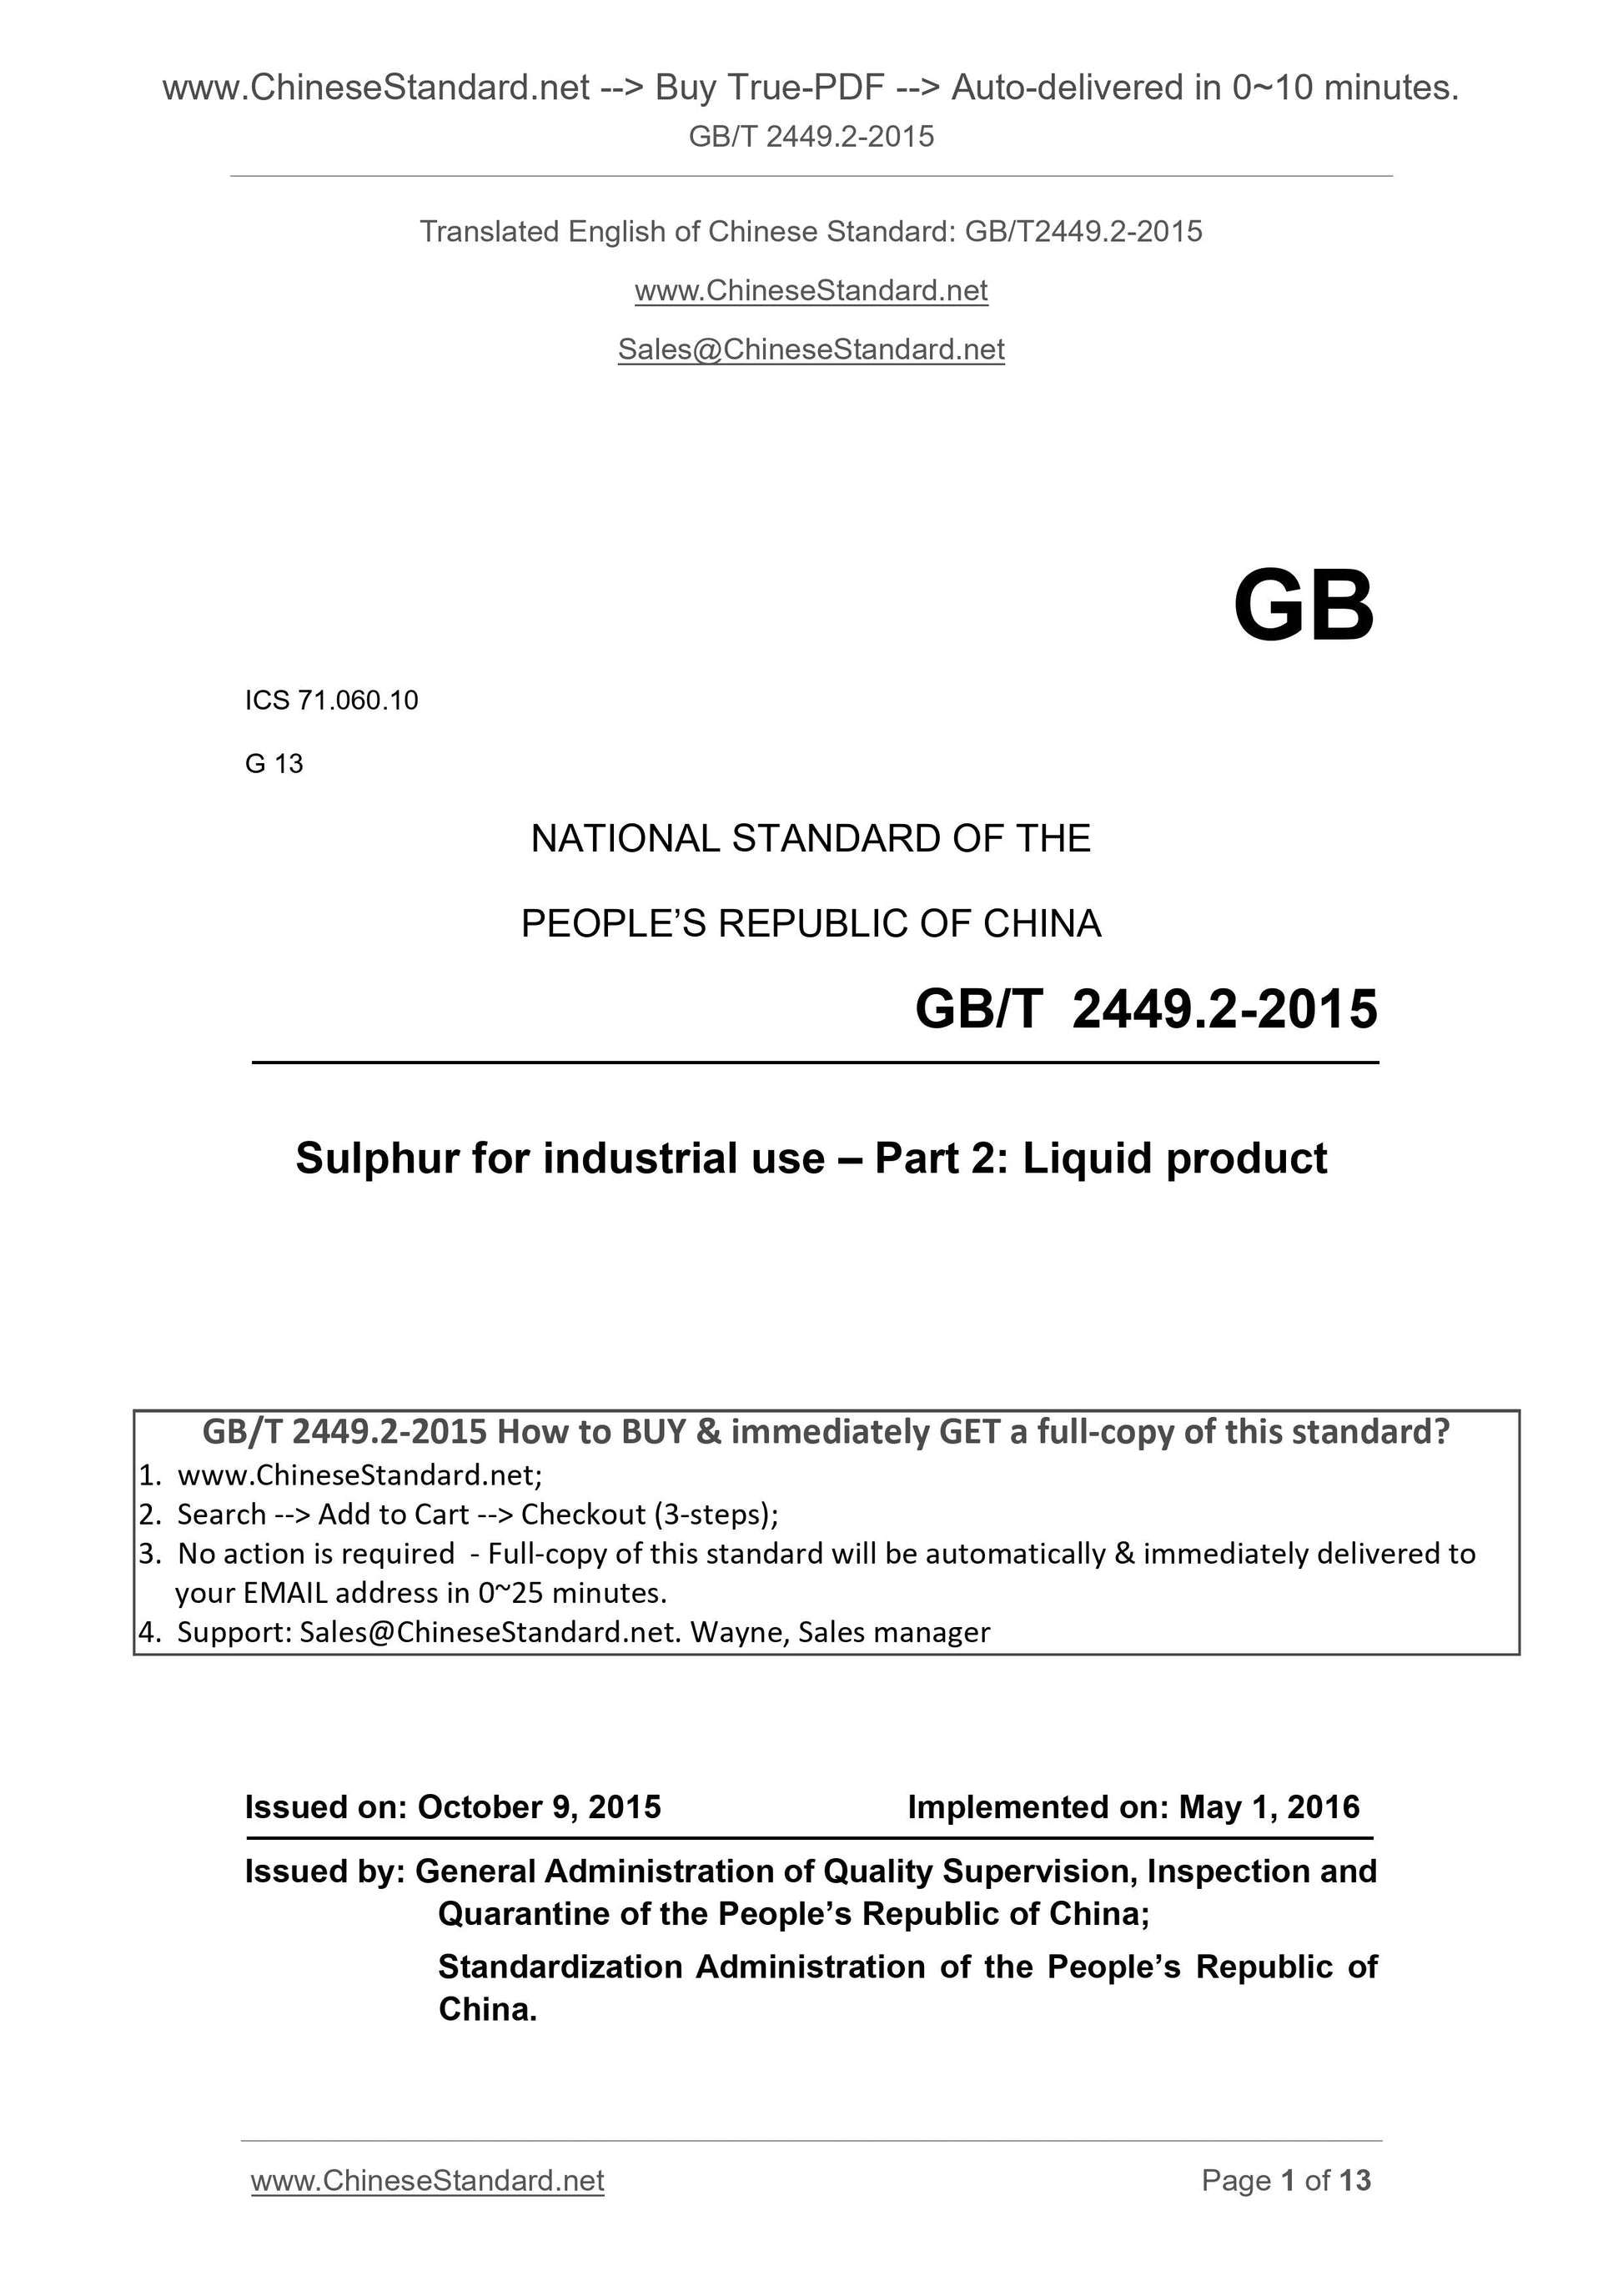 GB/T 2449.2-2015 Page 1